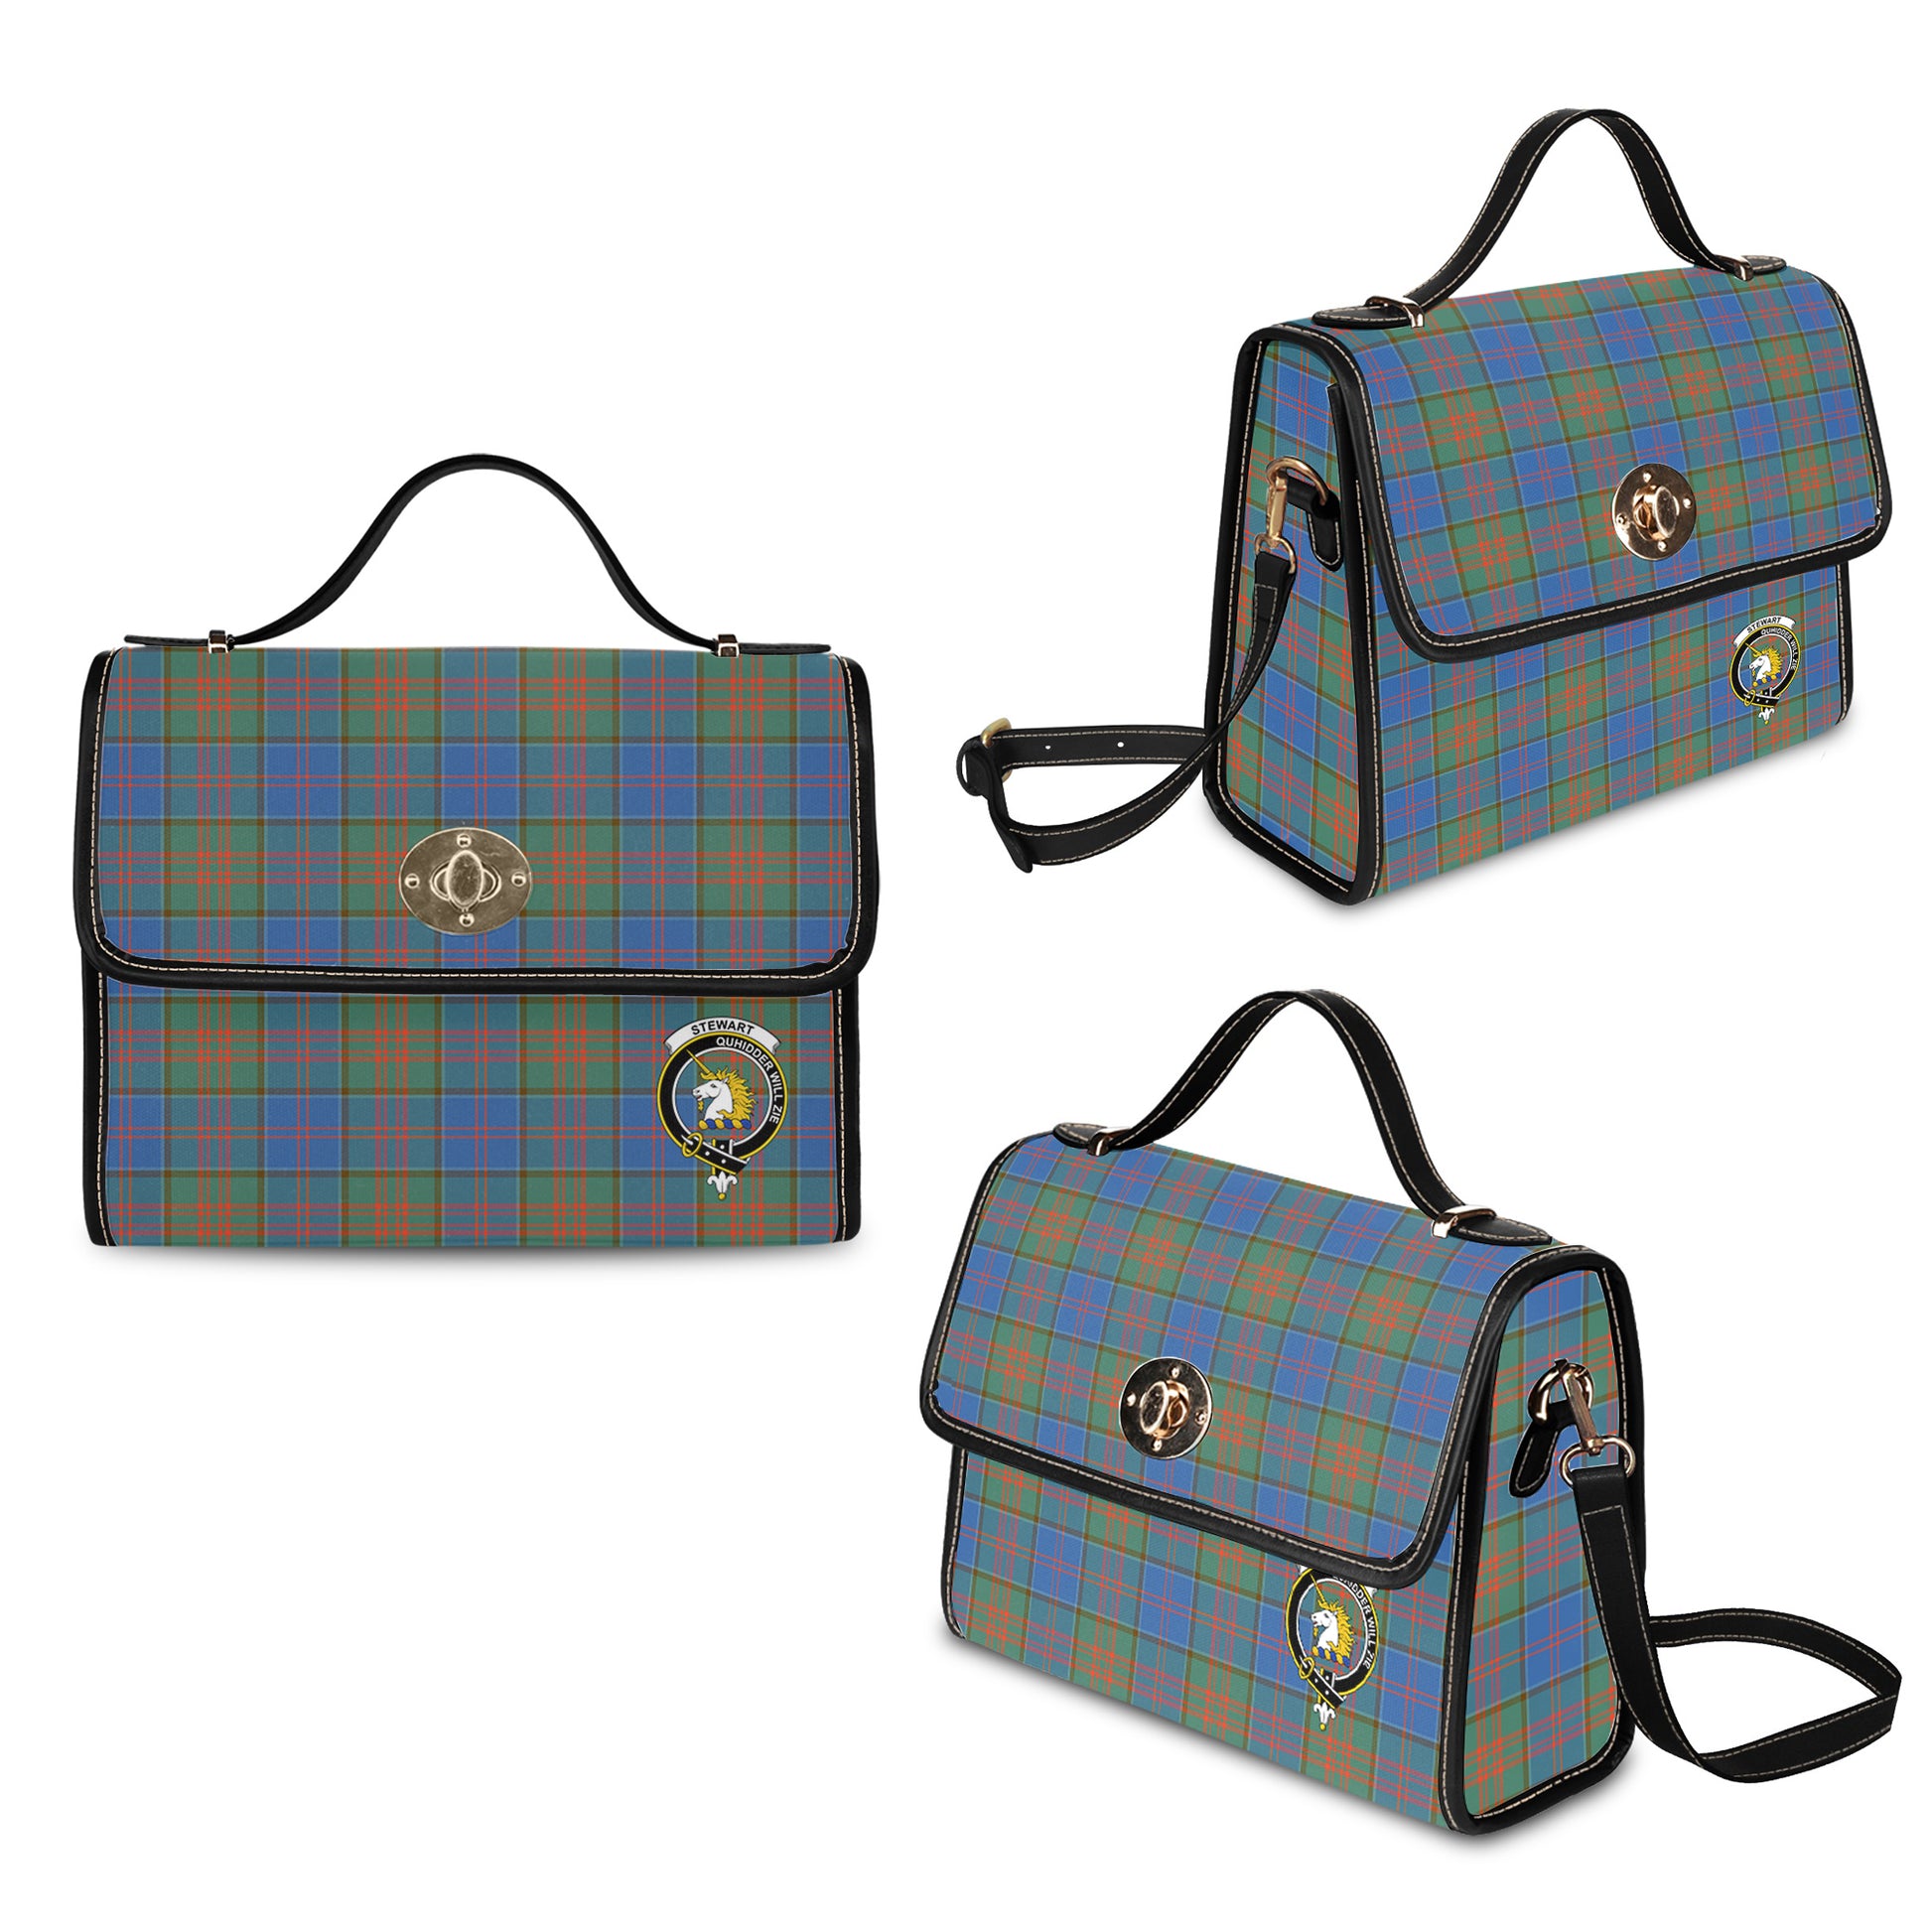 Stewart of Appin Hunting Ancient Tartan Leather Strap Waterproof Canvas Bag with Family Crest - Tartanvibesclothing